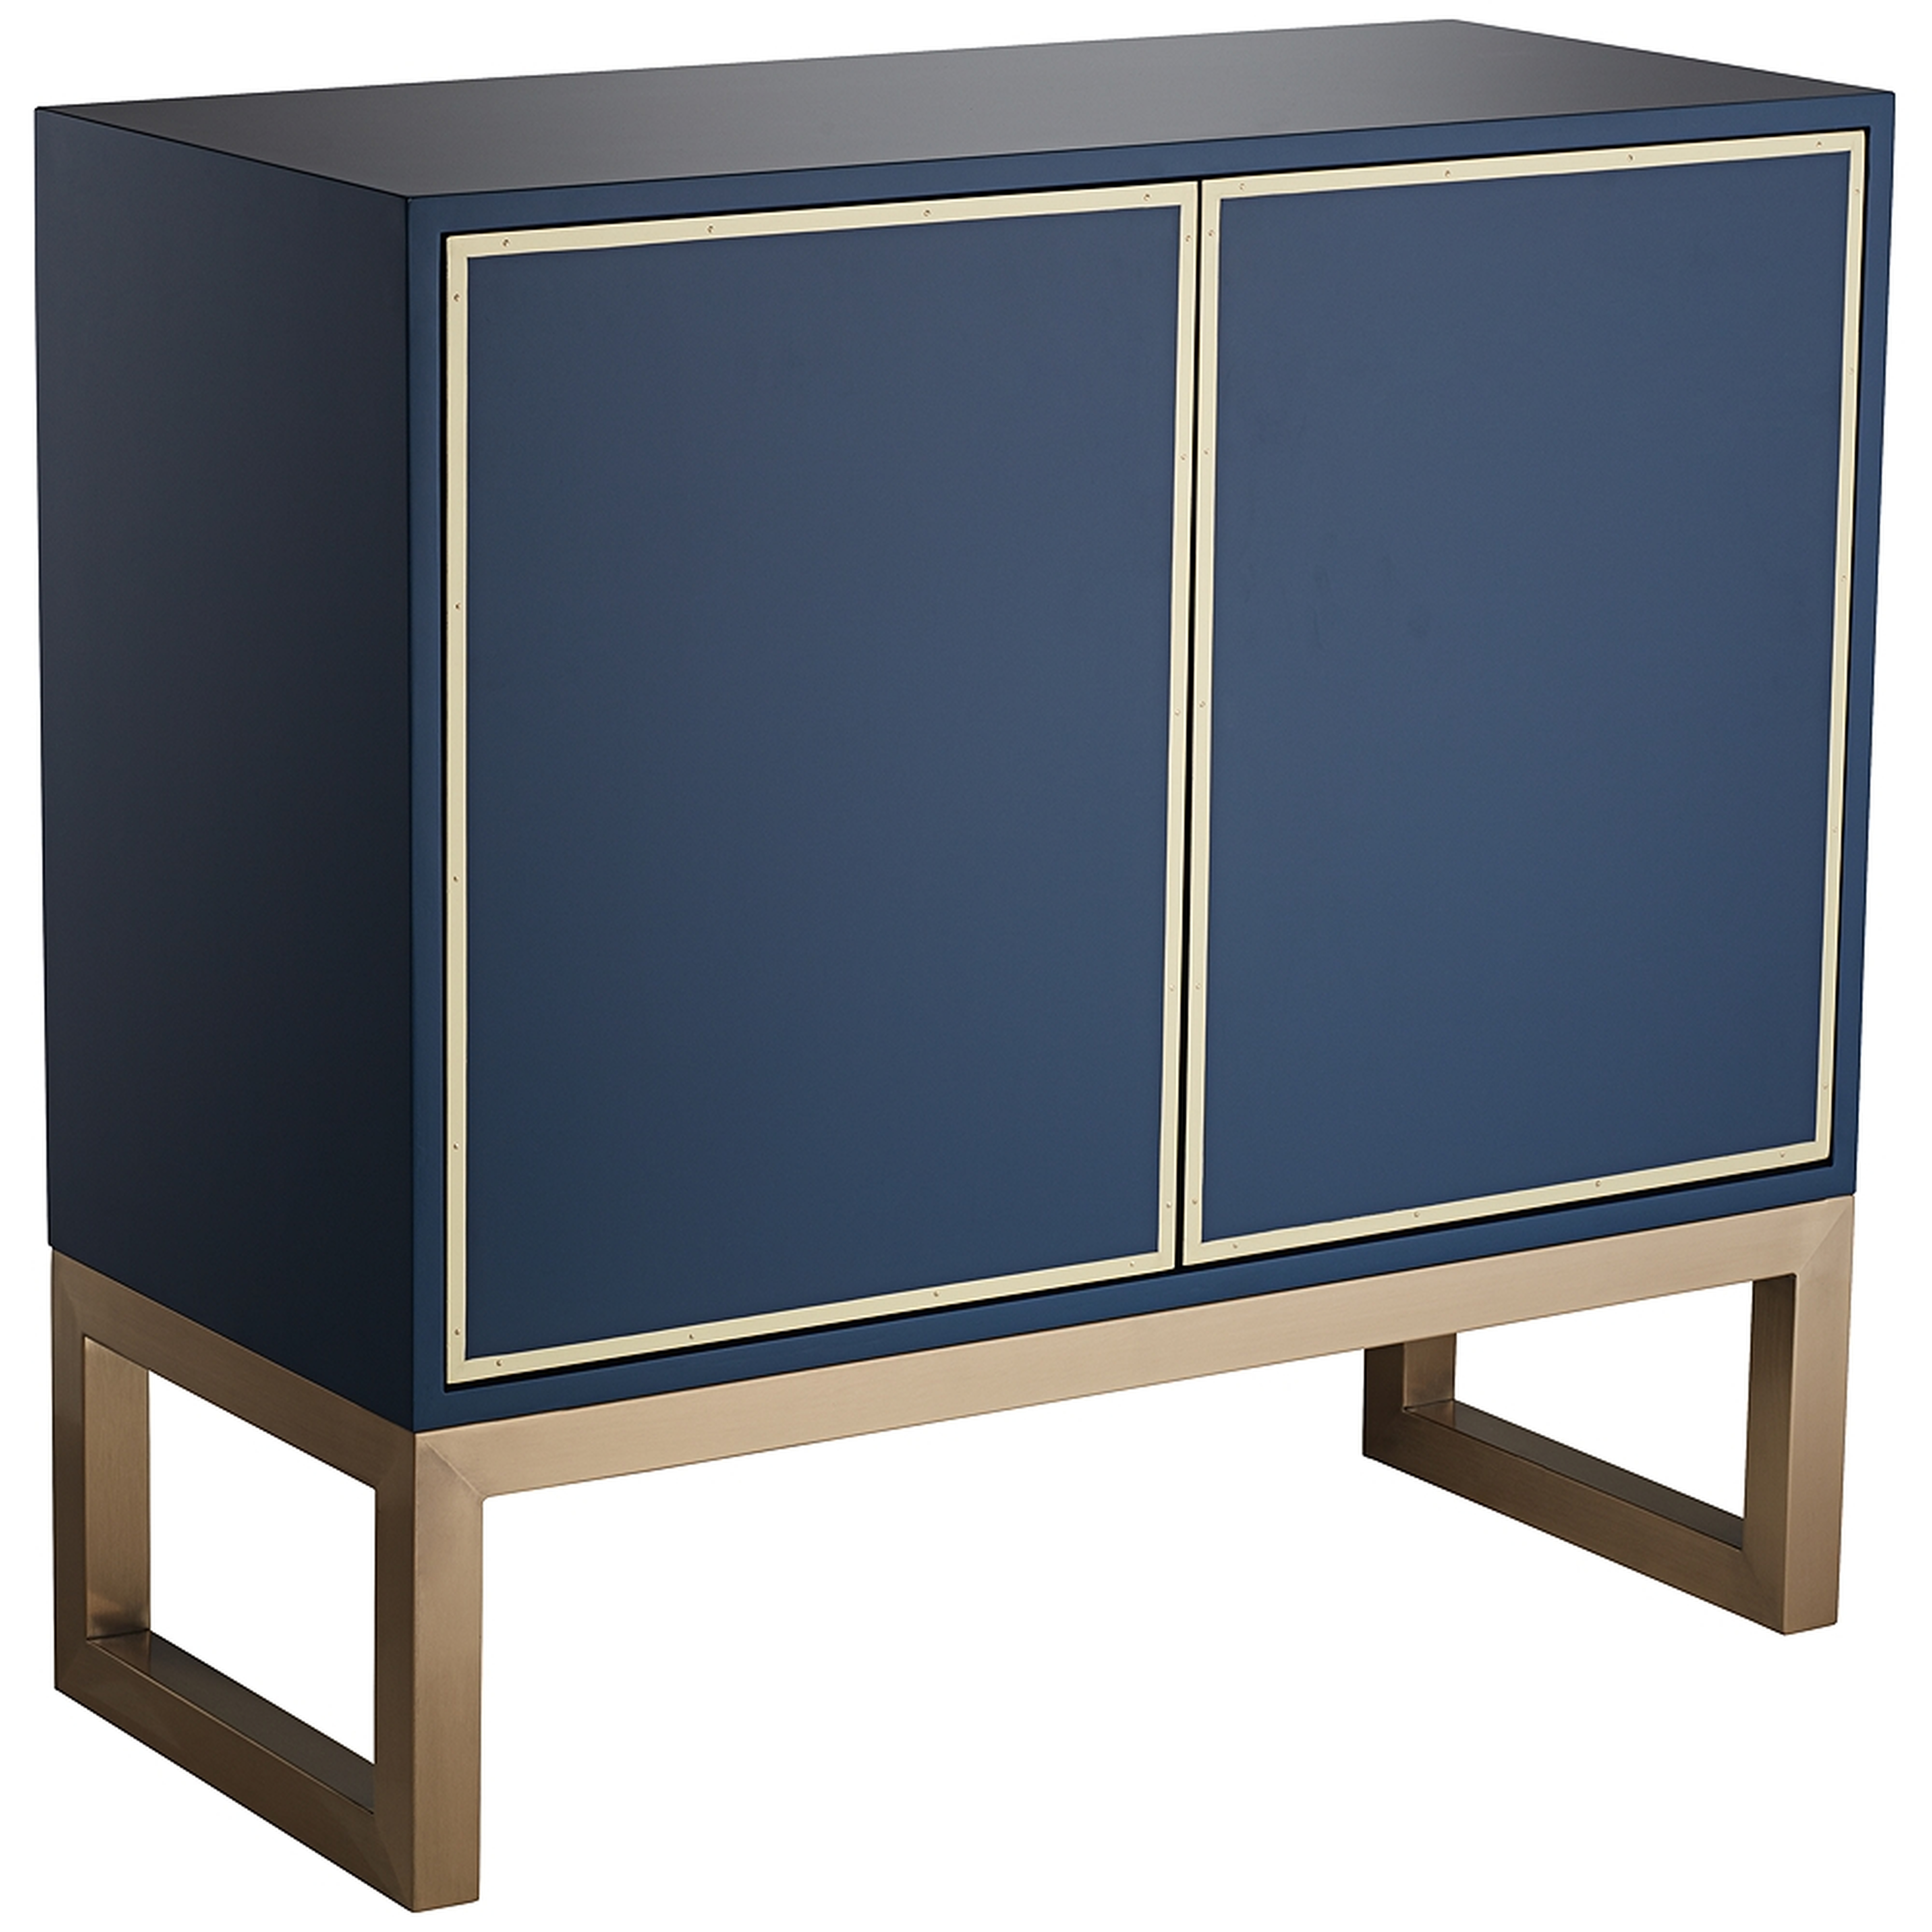 Tarim 35 3/4" Wide Blue and Gold 2-Door Accent Cabinet - Style # 79H97 - Lamps Plus